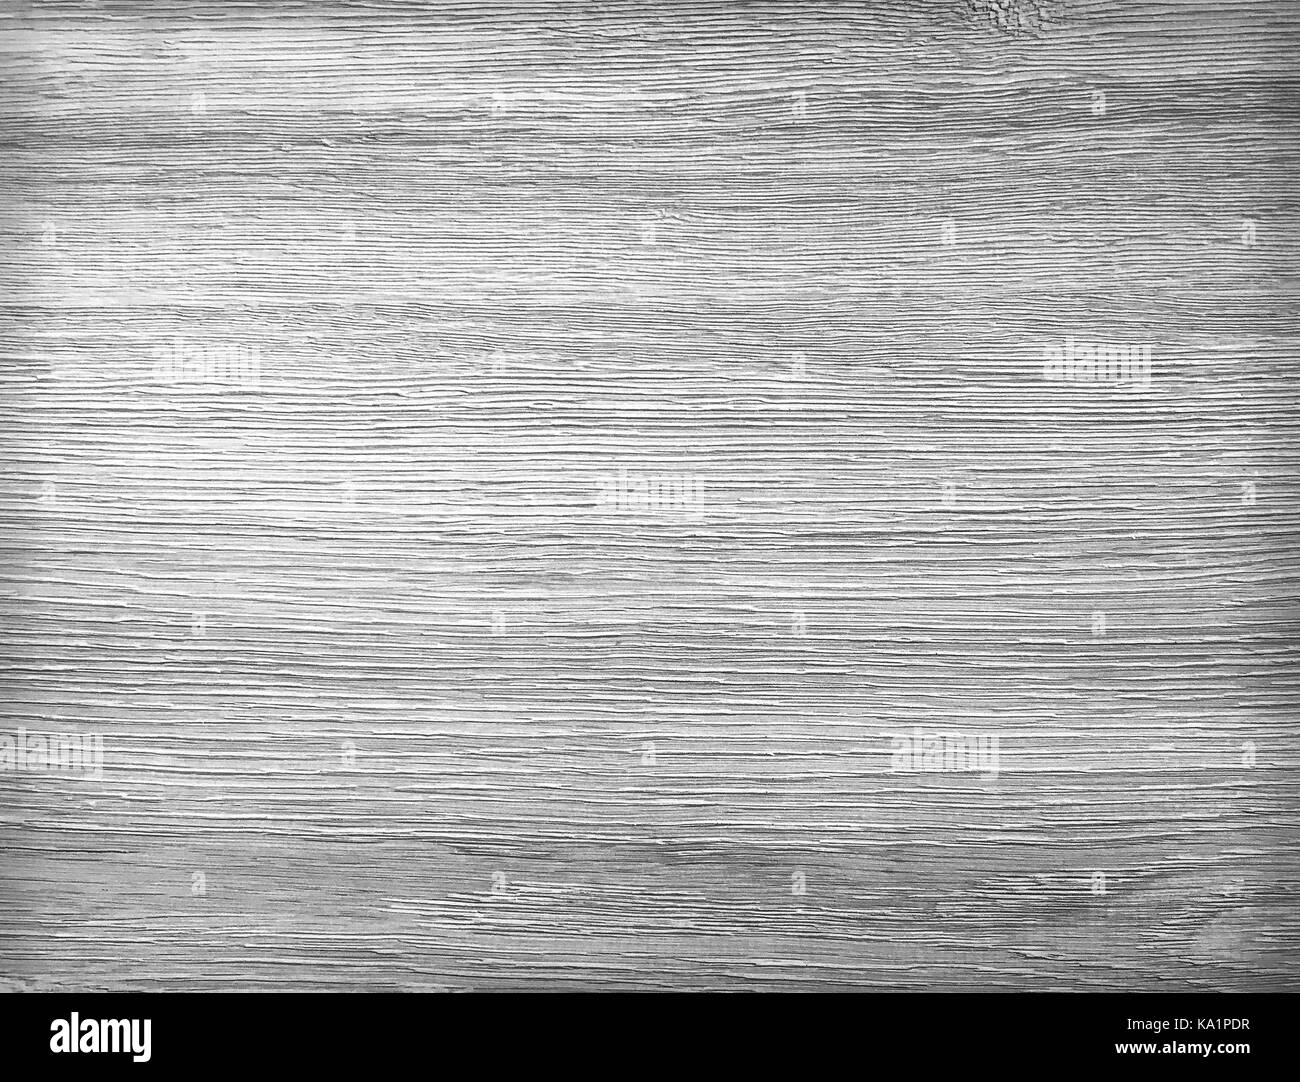 Wood texture with natural pattern Stock Photo